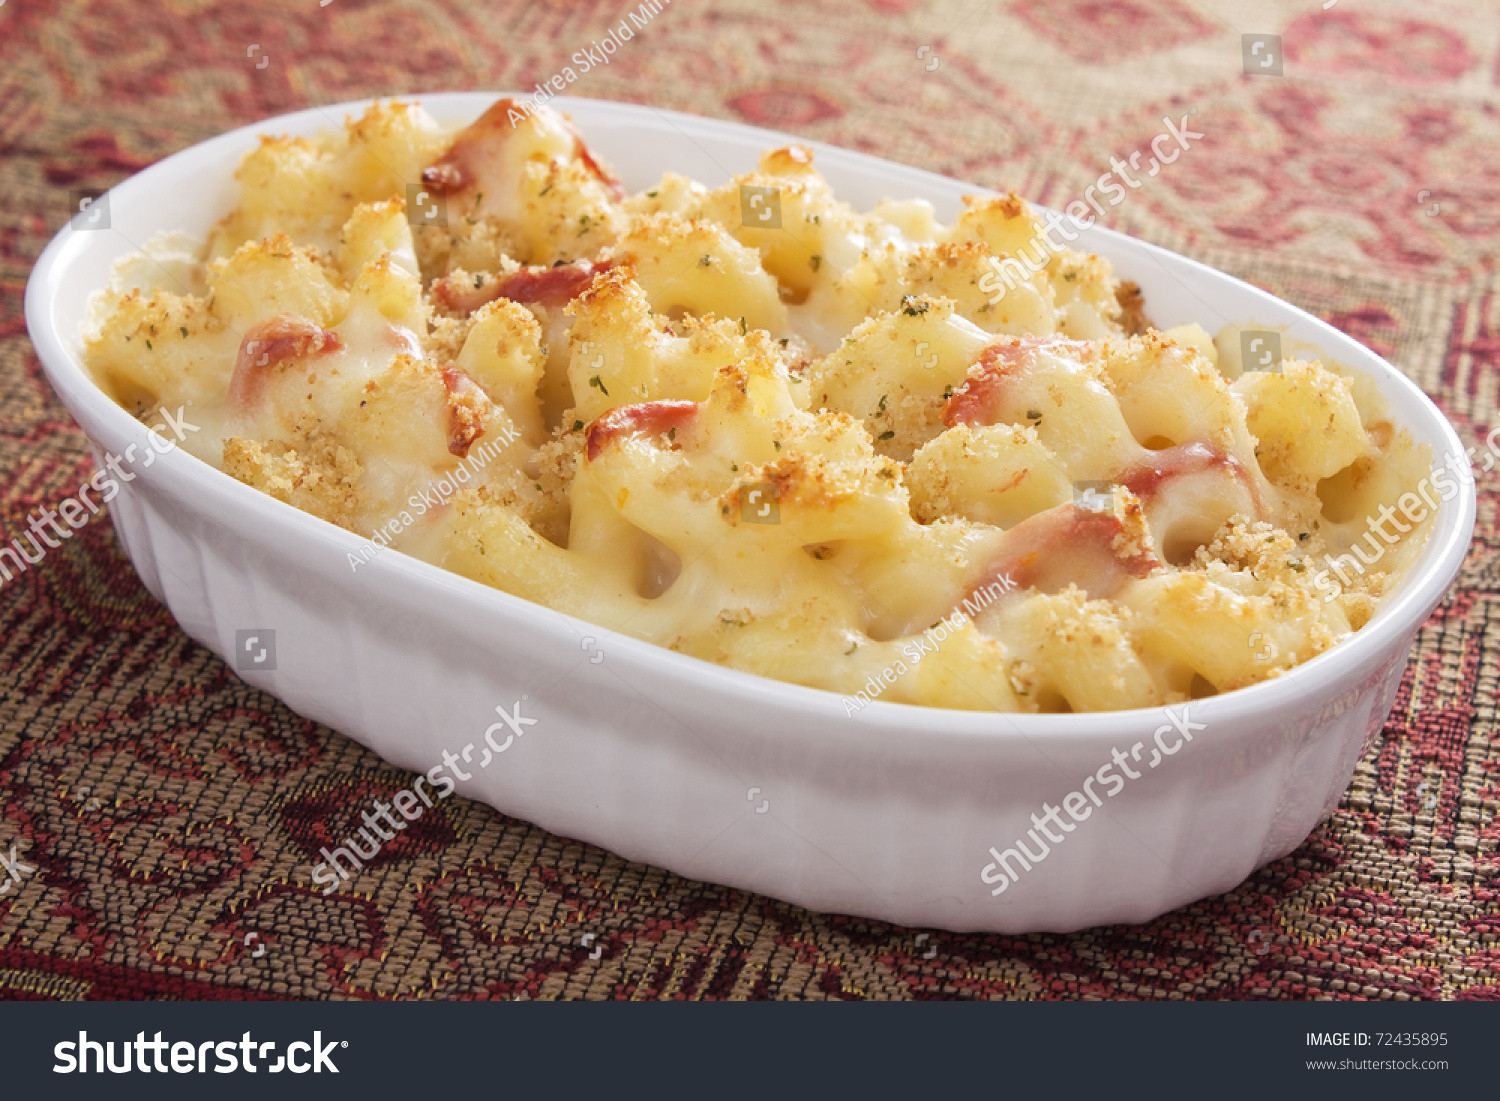 Baked Macaroni And Cheese With Tomatoes And Breadcrumbs
 Creamy Baked Macaroni And Cheese With Sun Dried Tomatoes